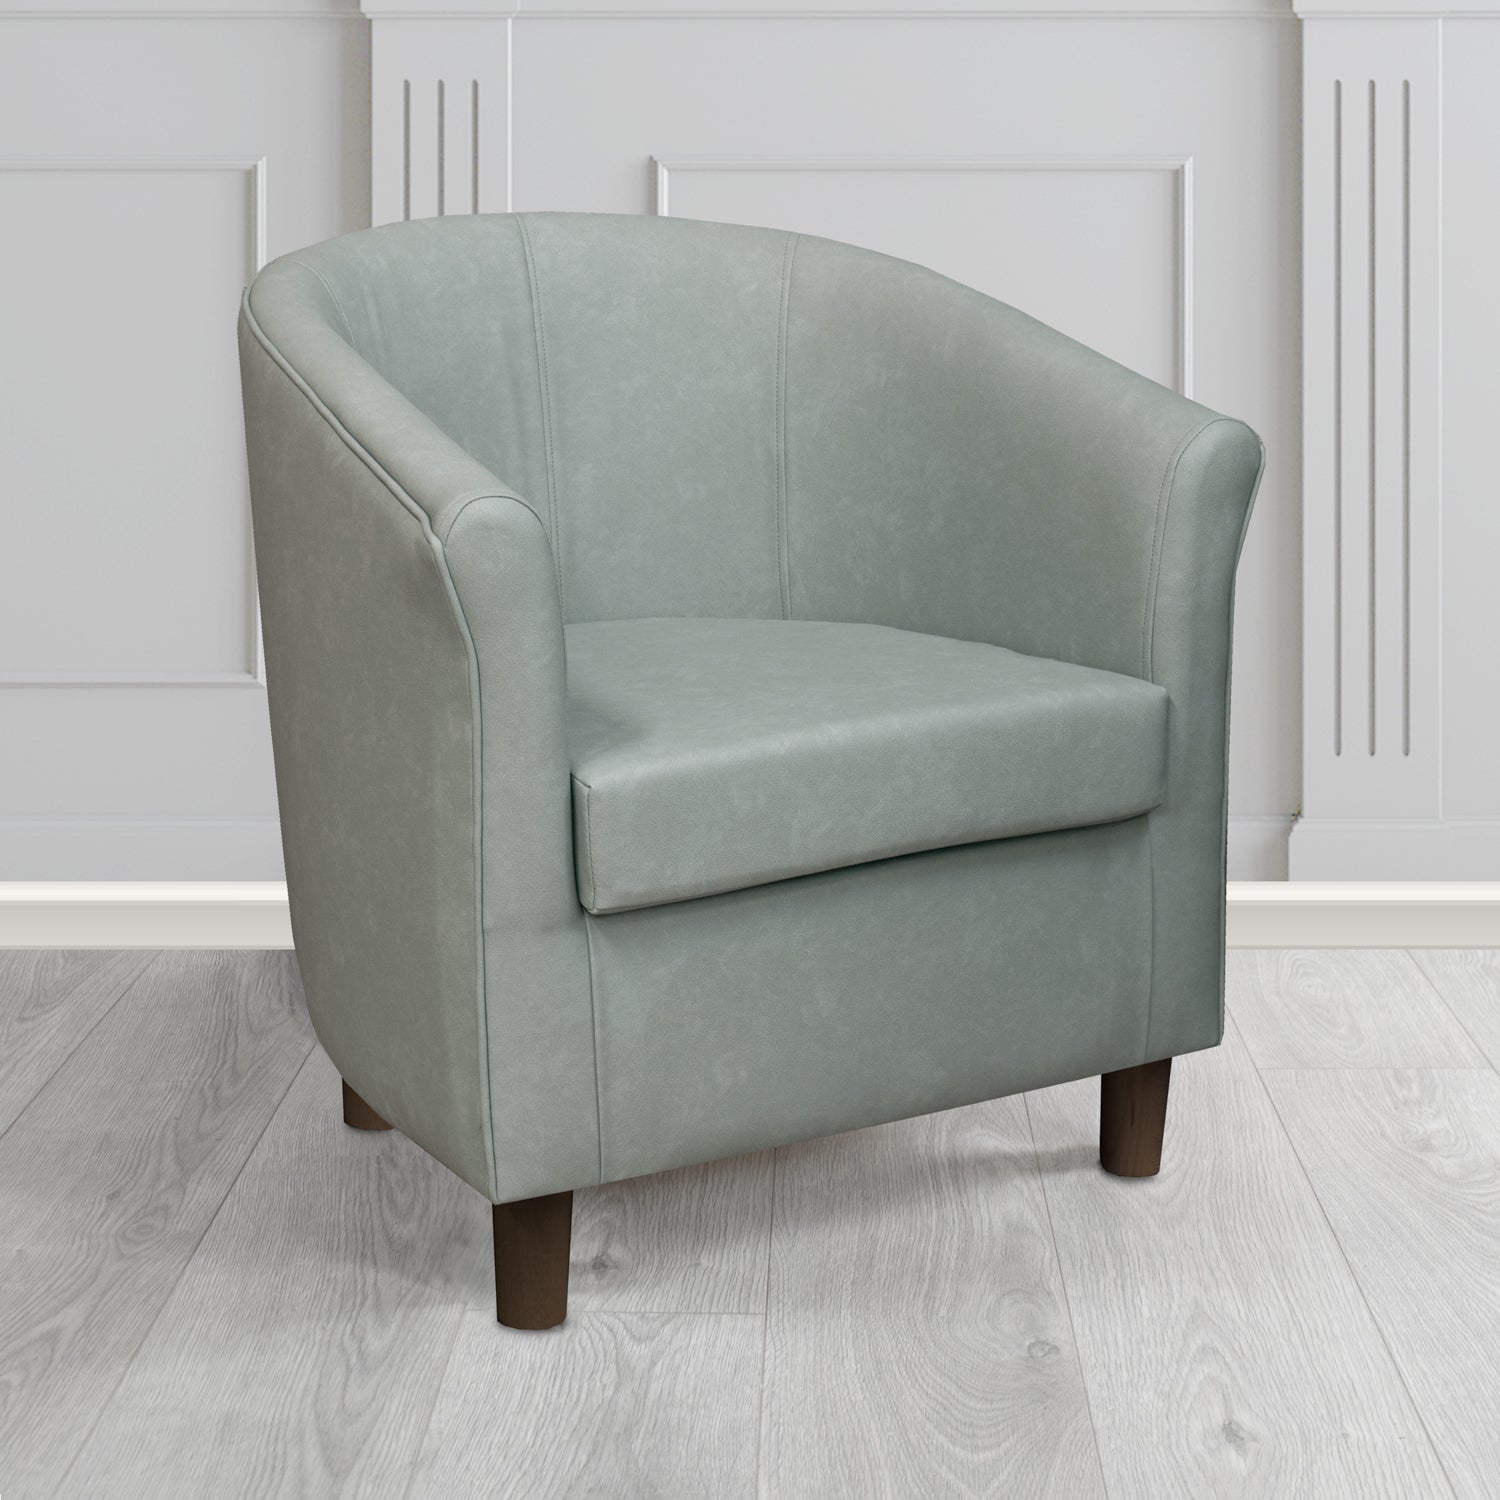 Tuscany Tub Chair in Infiniti Shadow INF1858 Antimicrobial Crib 5 Faux Leather - The Tub Chair Shop